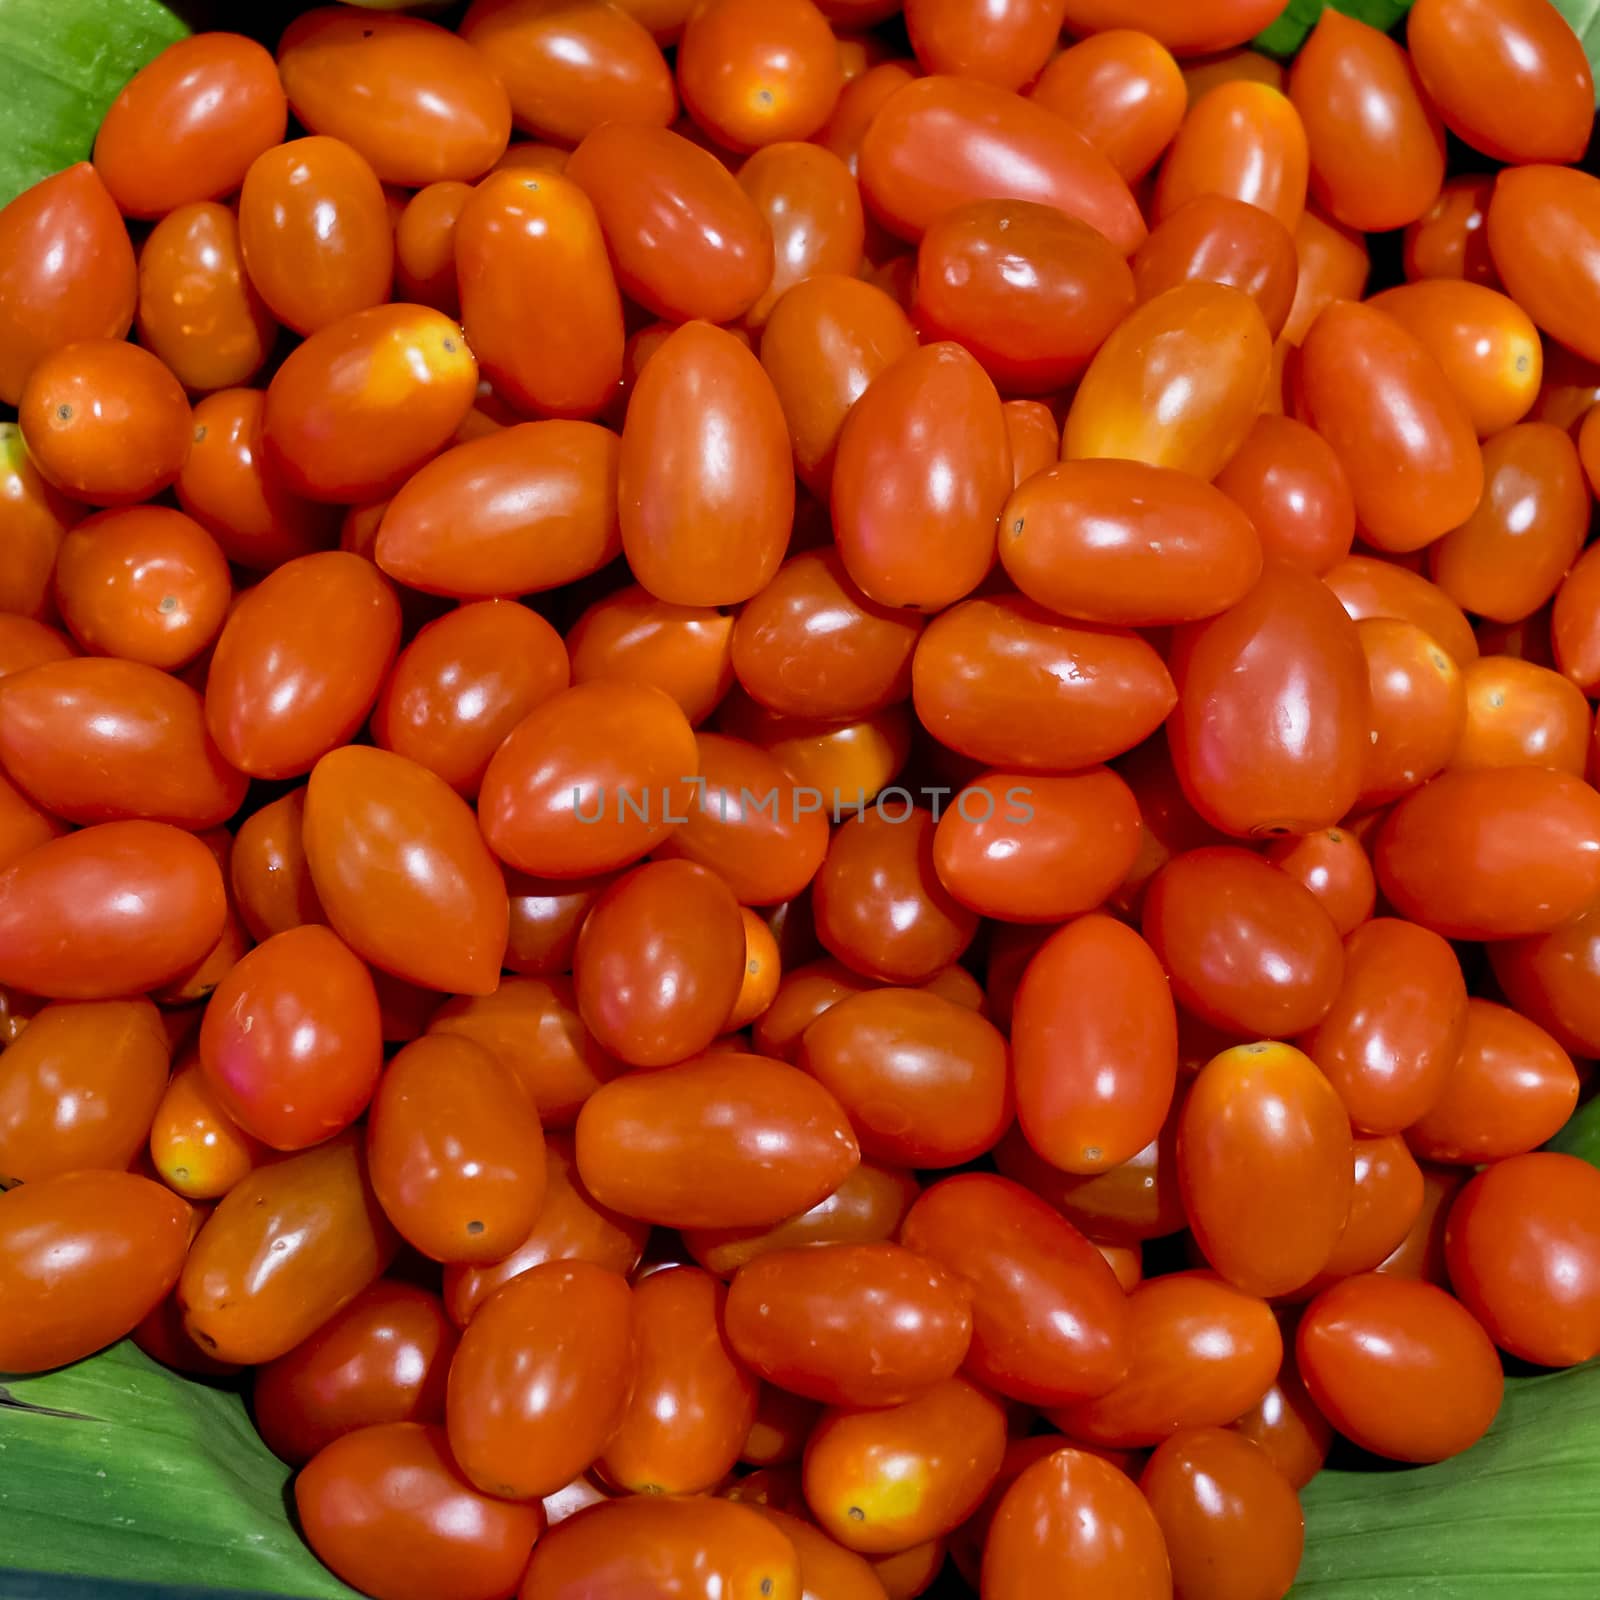 Group of fresh small tomatoes